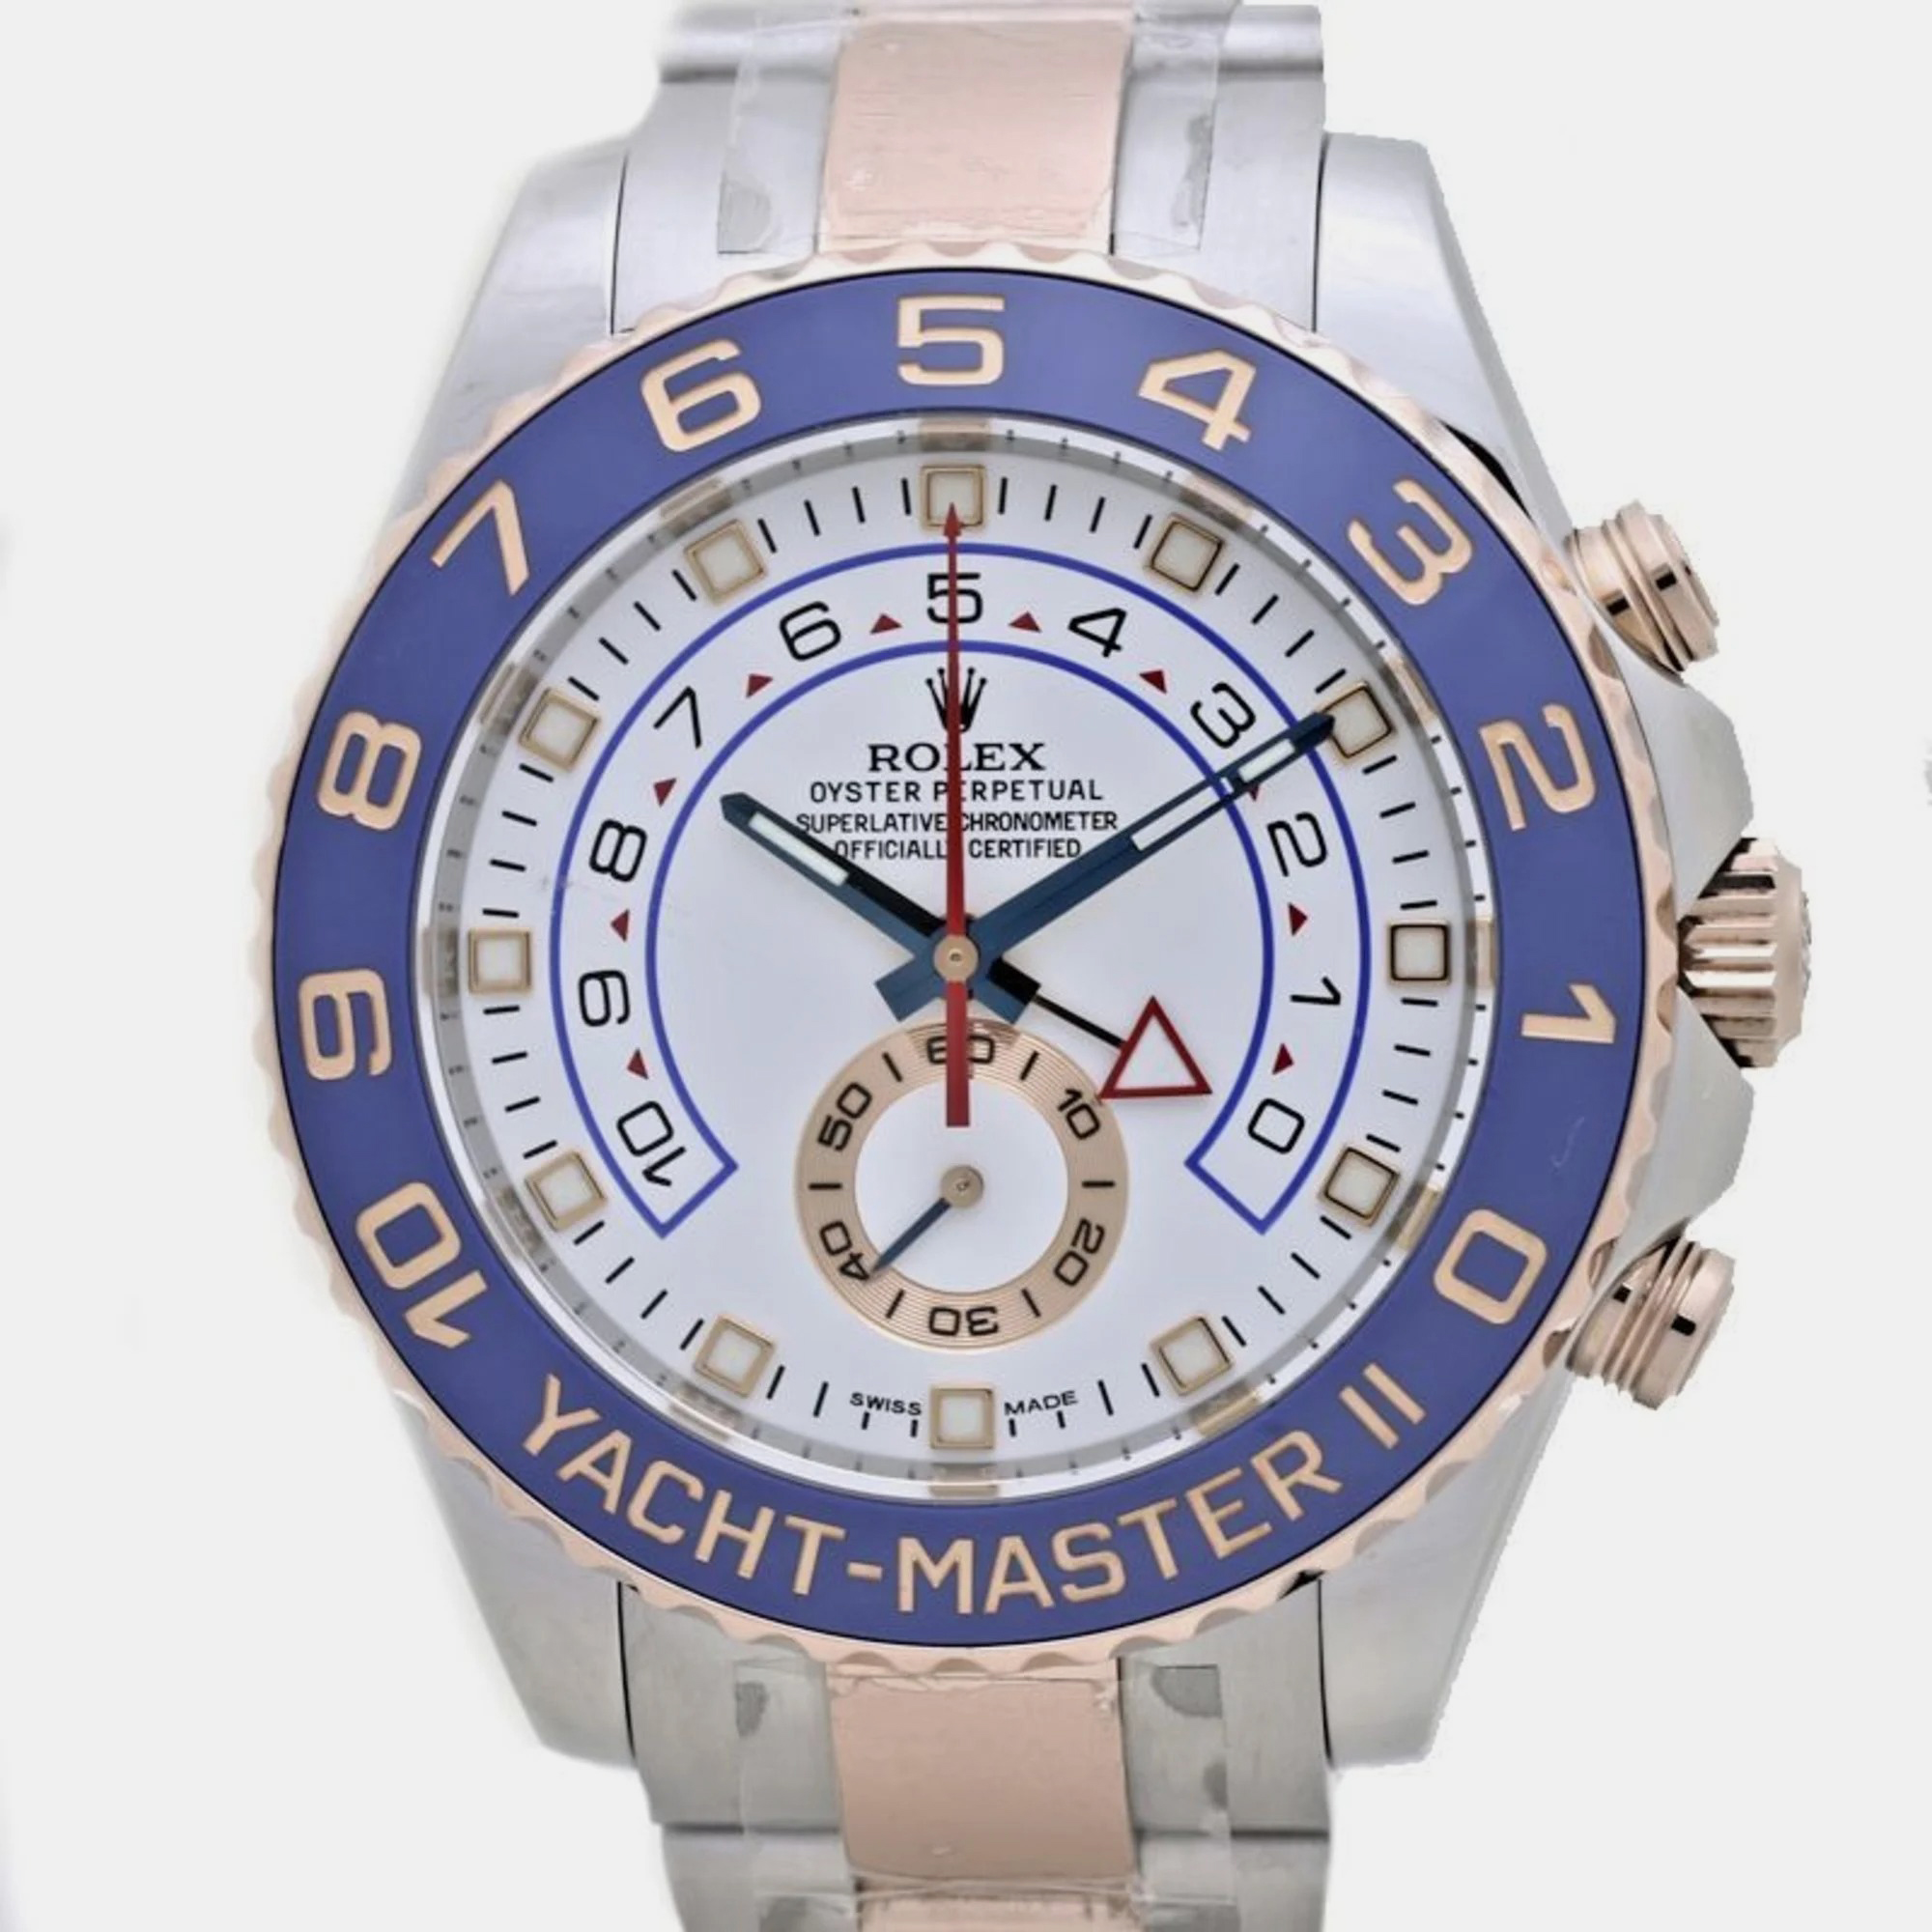 Pre-owned Rolex White 18k Rose Gold Stainless Steel Yacht-master Ii 116681 Automatic Men's Wristwatch 44 Mm